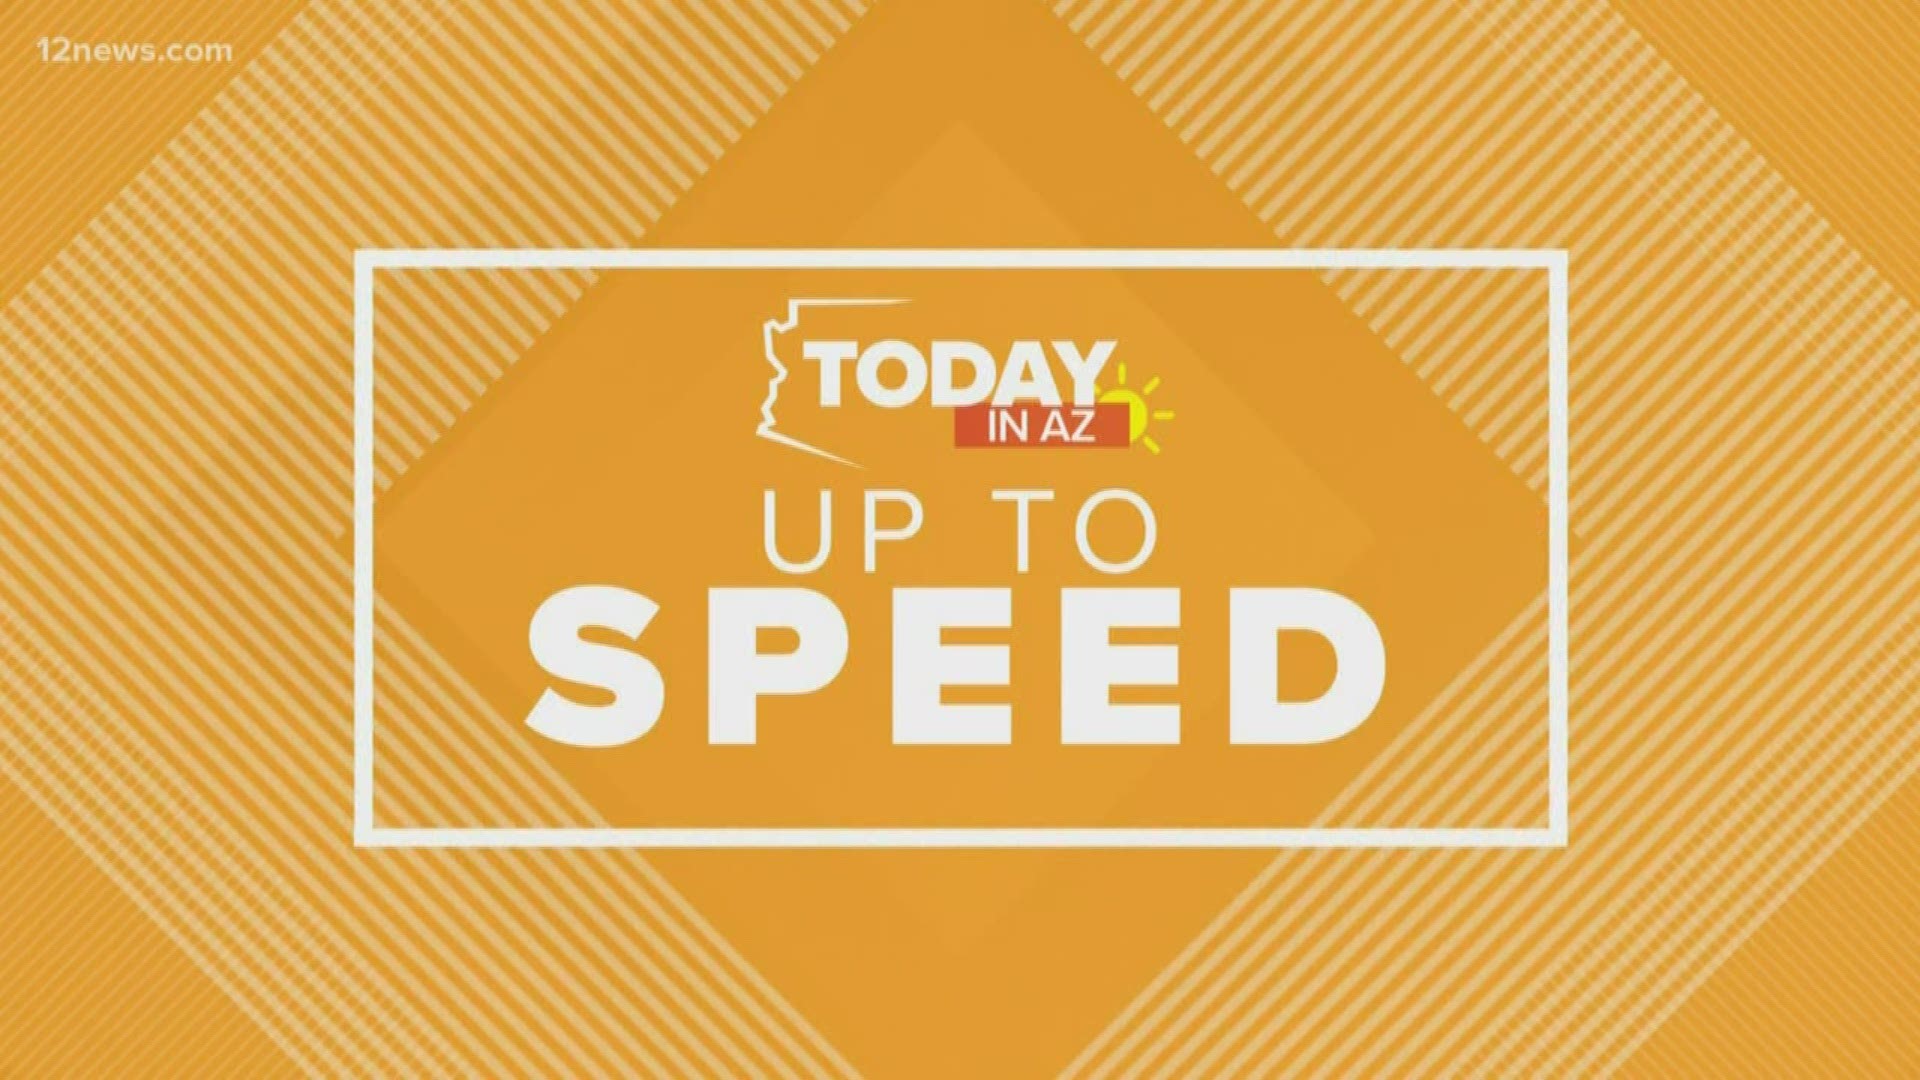 Get 'Up to Speed' on Tuesday morning.